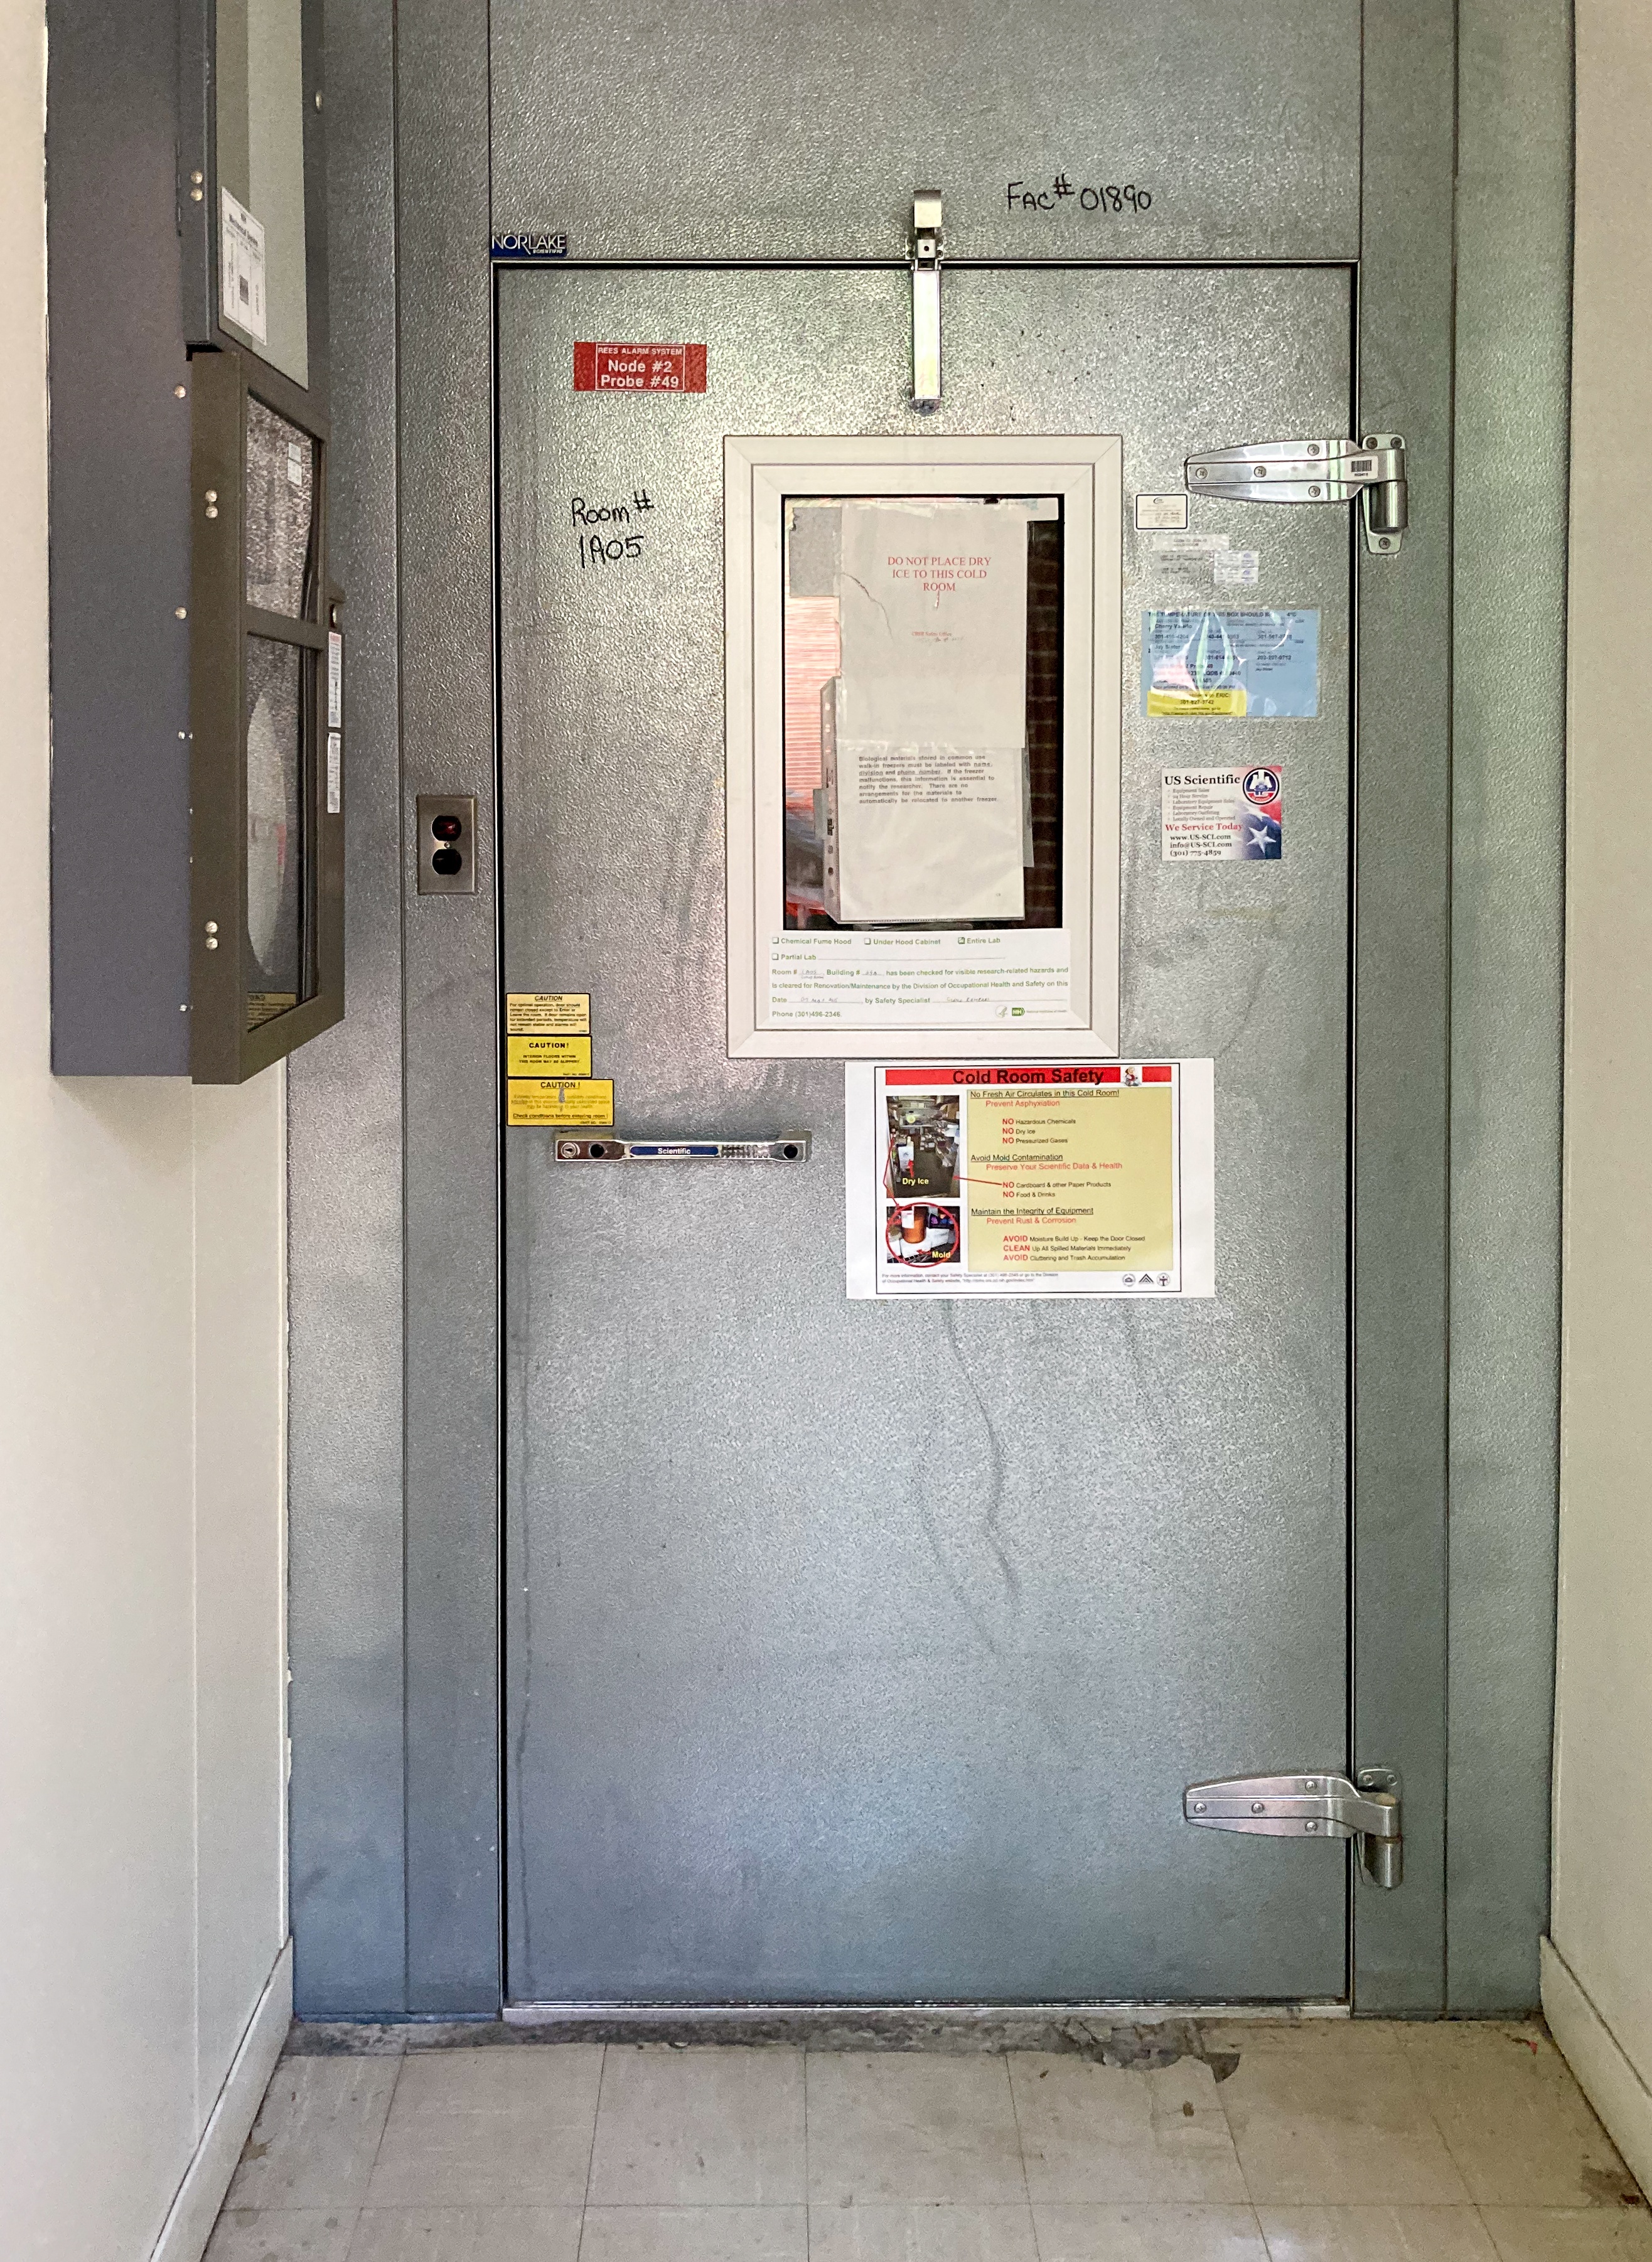 image of a metal door leading to the refrigerated room